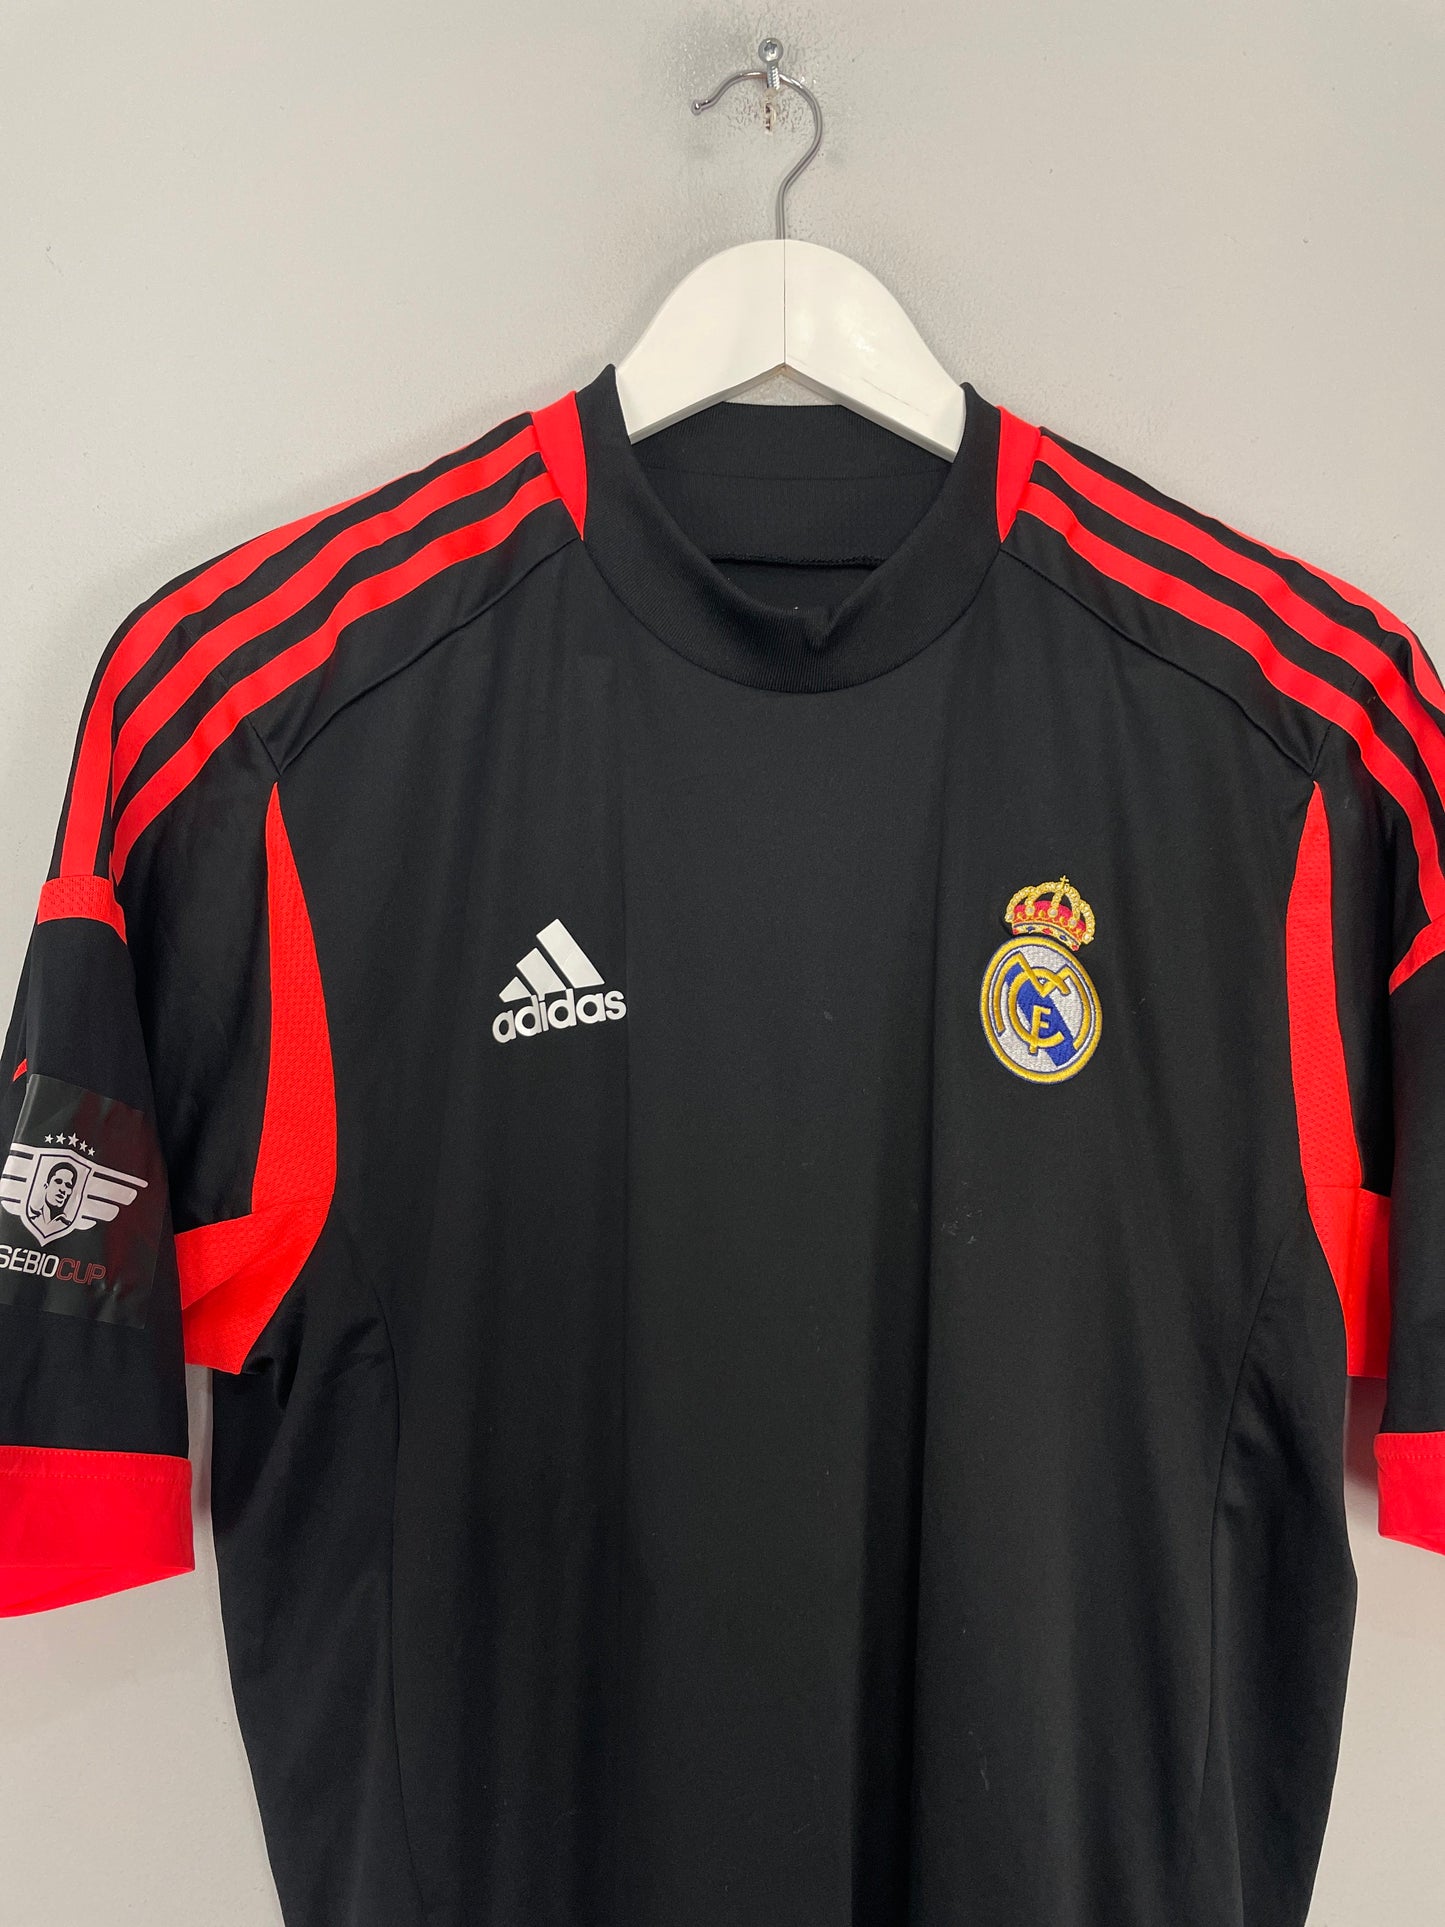 2012/13 REAL MADRID #13 *MATCH ISSUE* EUSEBIO CUP GK SHIRT (L) ADIDAS